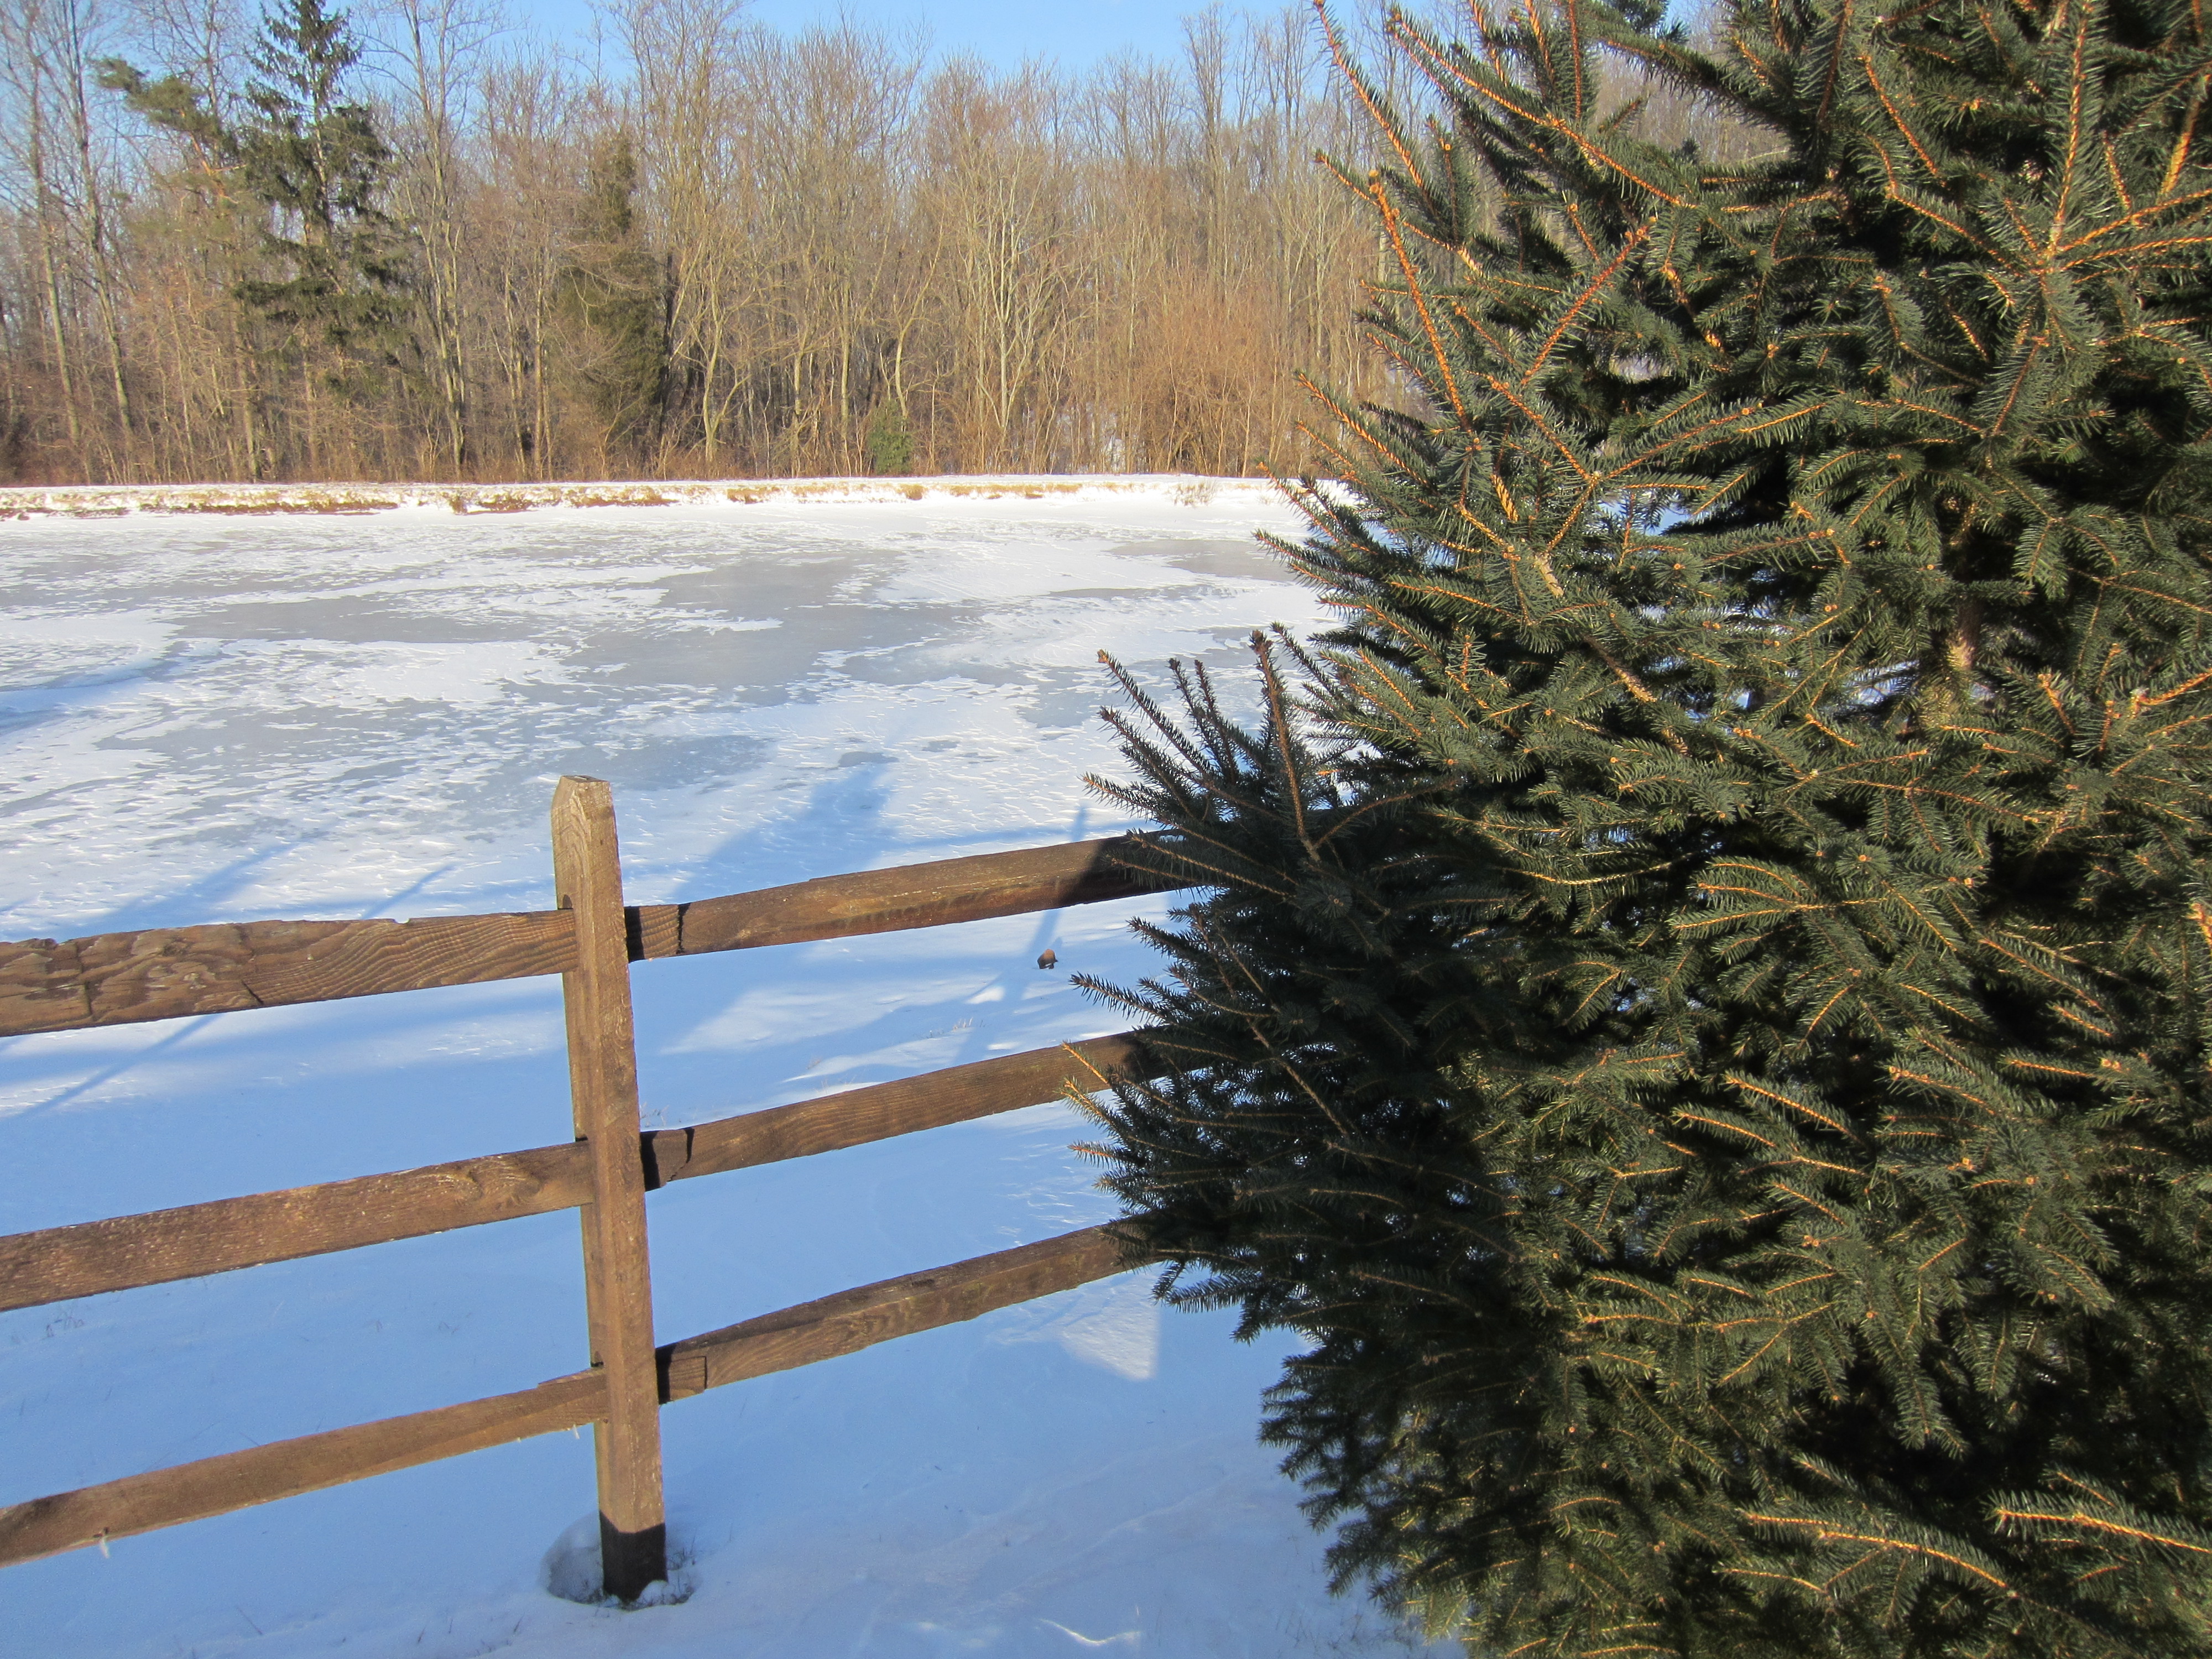 There's Hope Under the Frozen Trees: Enjoying Winter on the Farm ...